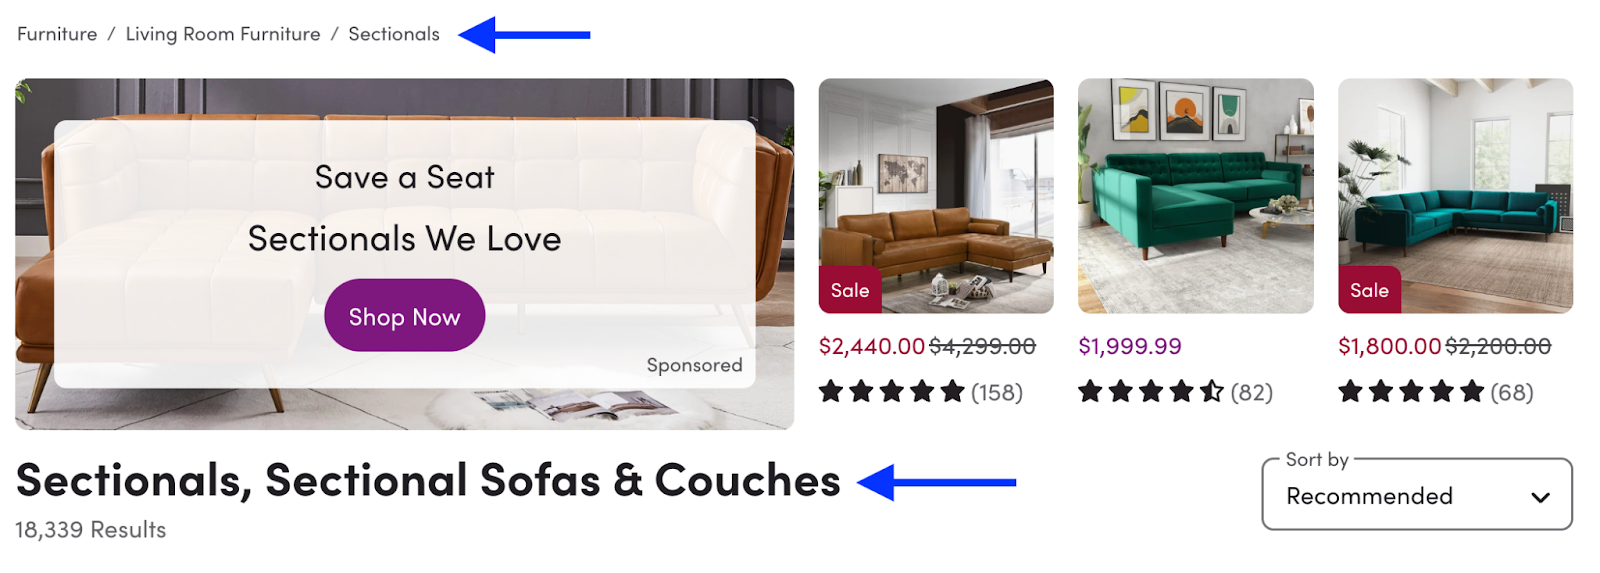 technical SEO for ecommerce: Wayfair’s header for the product page for sectionals and couches. 